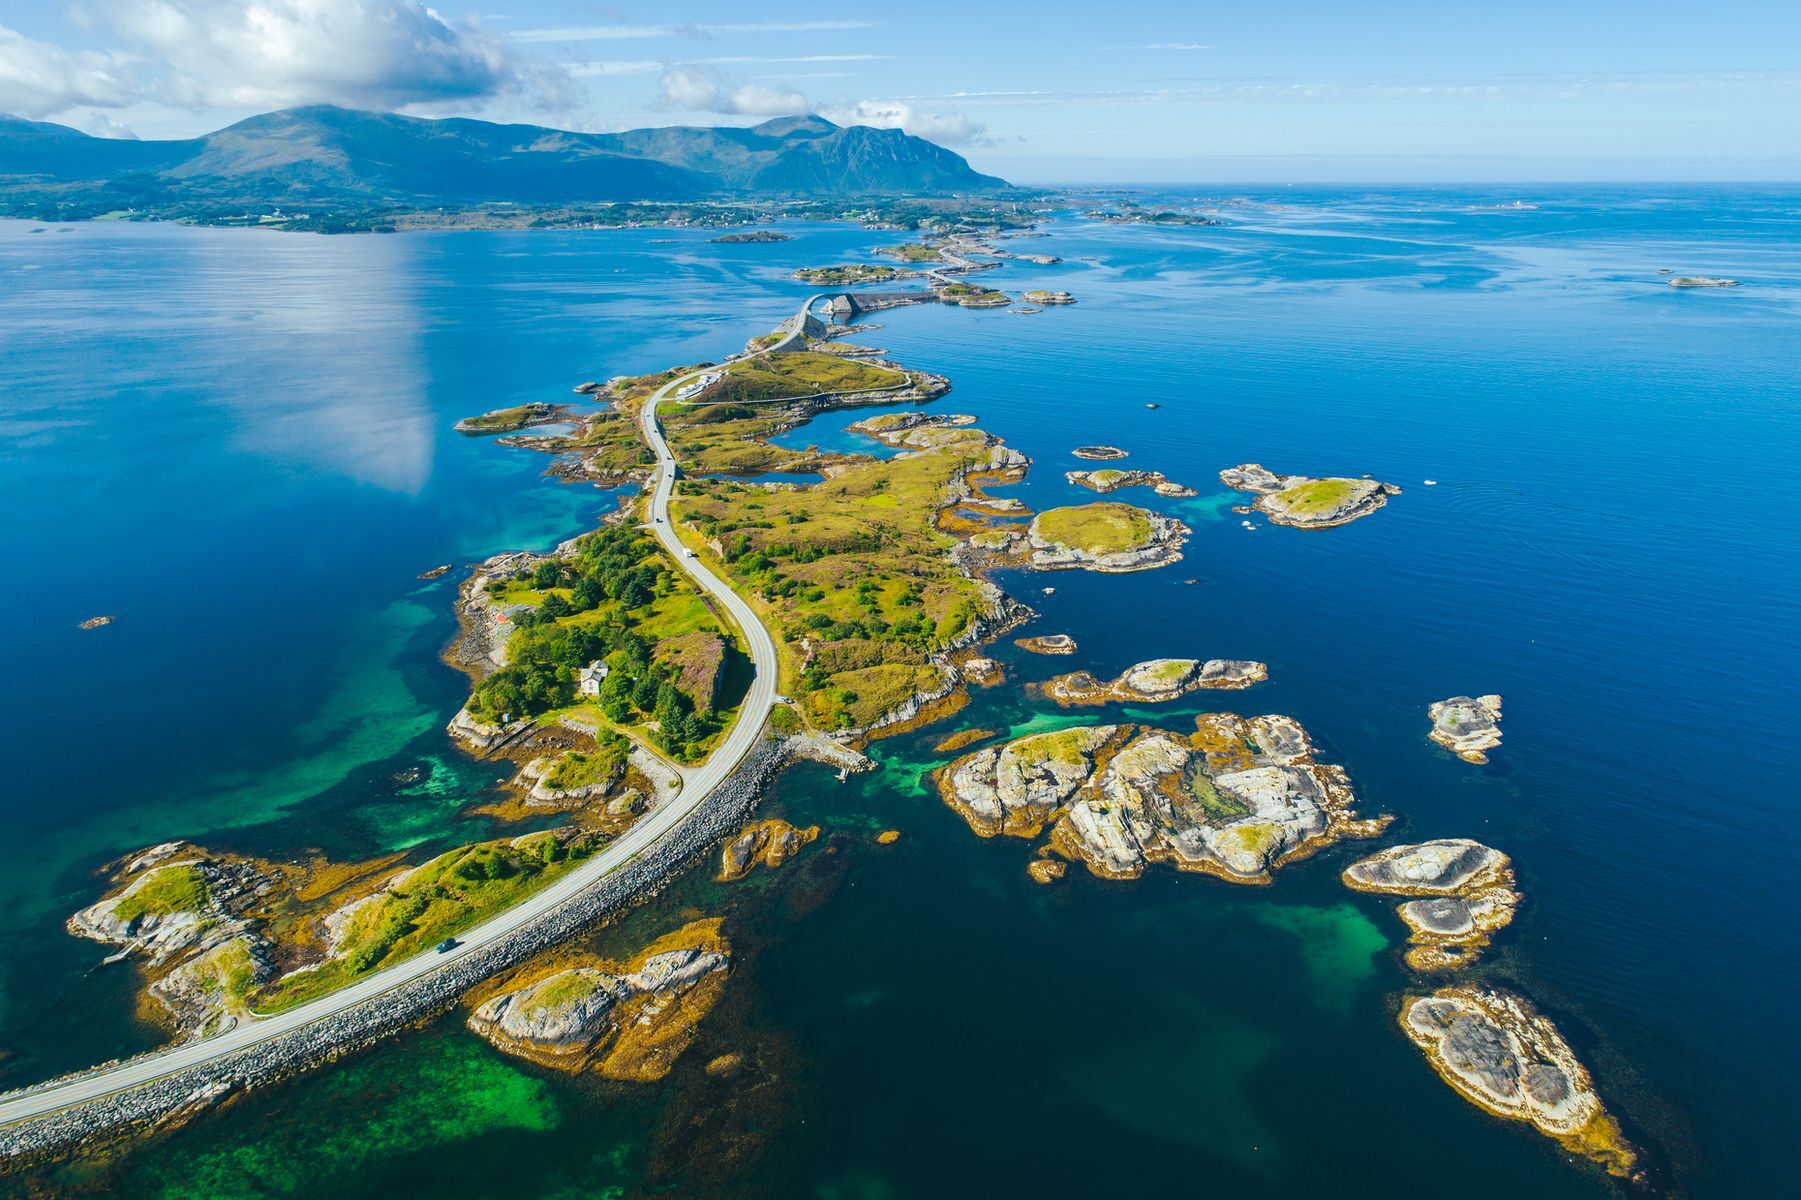 Among Norway’s national tourist routes, the Atlantic Ocean Road (<a href="https://www.visitnorway.com/places-to-go/fjord-norway/northwest/listings-northwest/norwegian-scenic-routes-the-atlantic-road/11862/?lang=usa" rel="noreferrer noopener">Atlanterhavsvegen</a>) is undeniably the most spectacular. This motorway extends for just over eight kilometres (five miles) and serves as an important artery for both fishers and those venturing into the northern islands. You’ll find rugged coastlines, bucolic villages, and the Troll Church caves along the way.